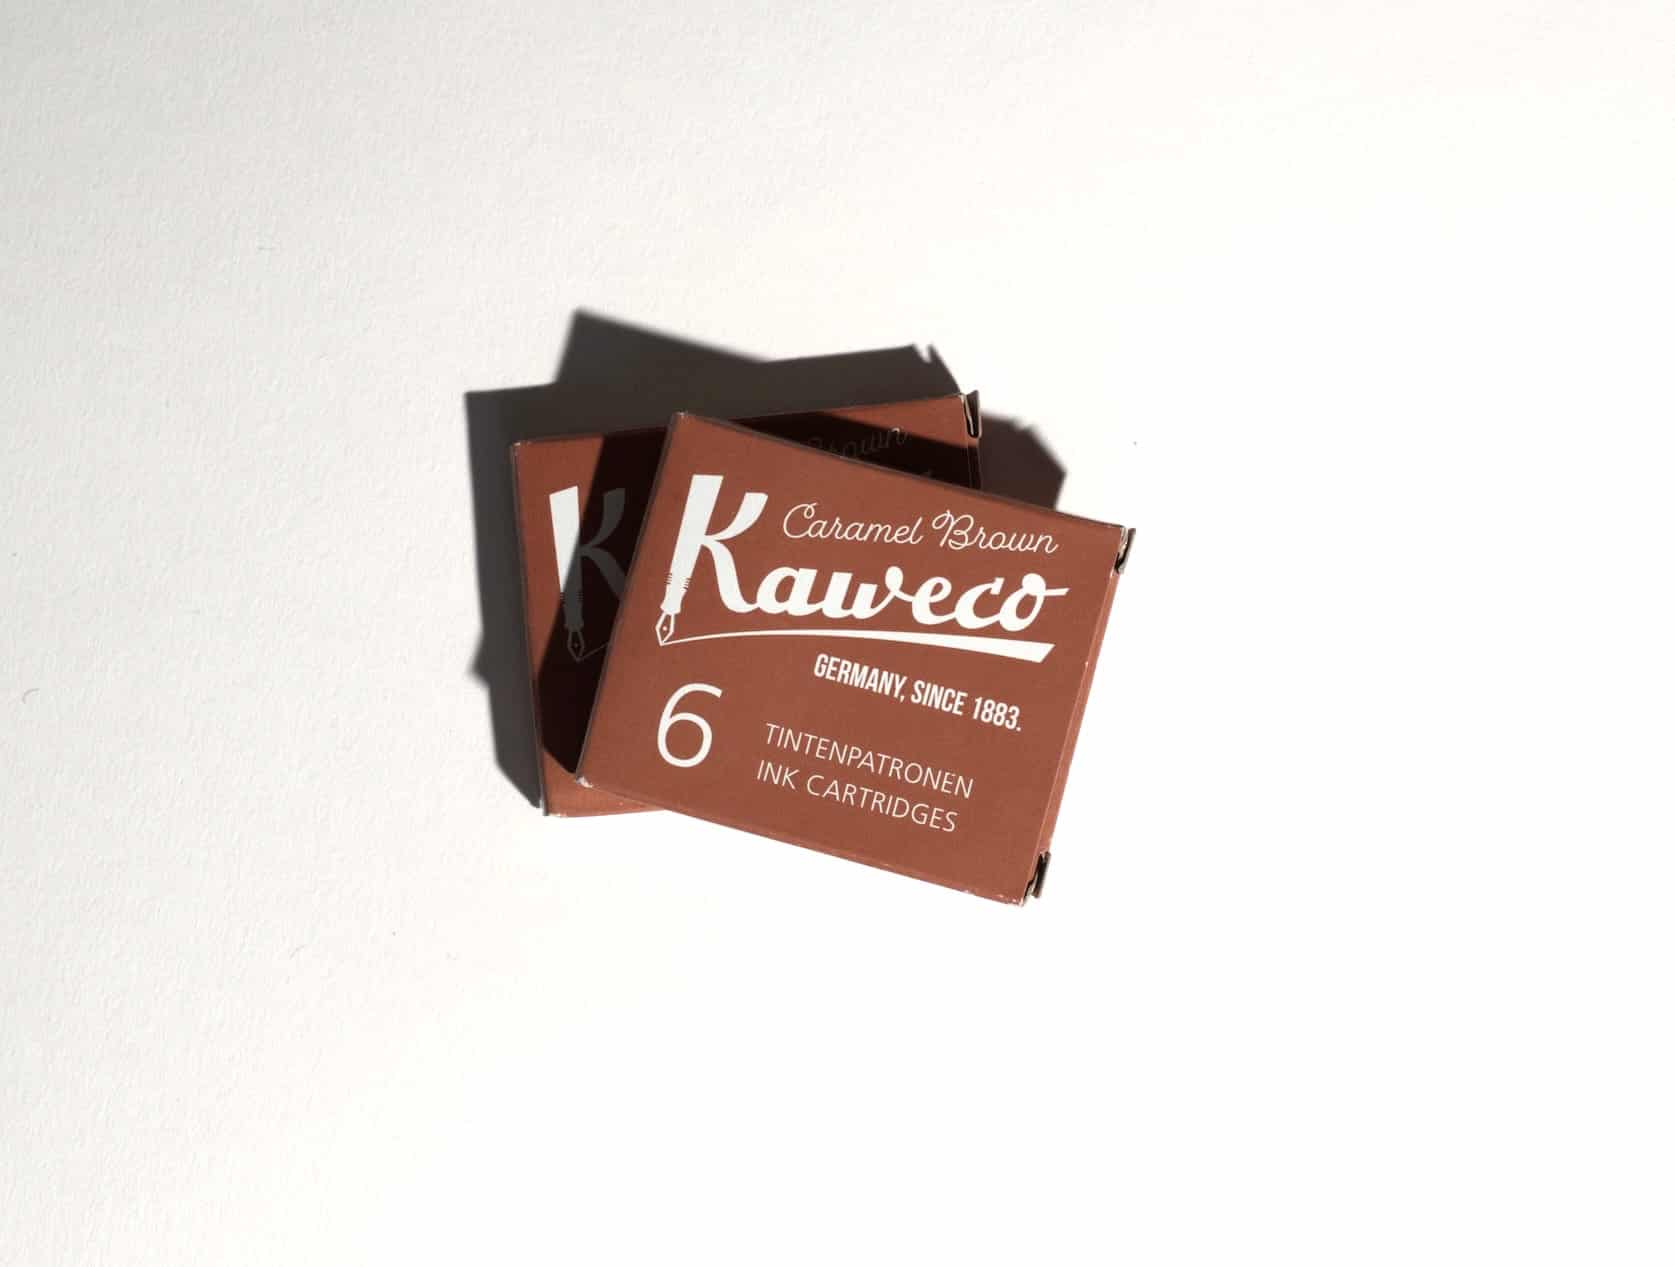 Two boxes of ink cartridges lie on a white surface. Text on packaging reads: Kaweco. Caramel Brown. Germany, since 1883. 6 Tintenpatronen. Ink Cartridges.